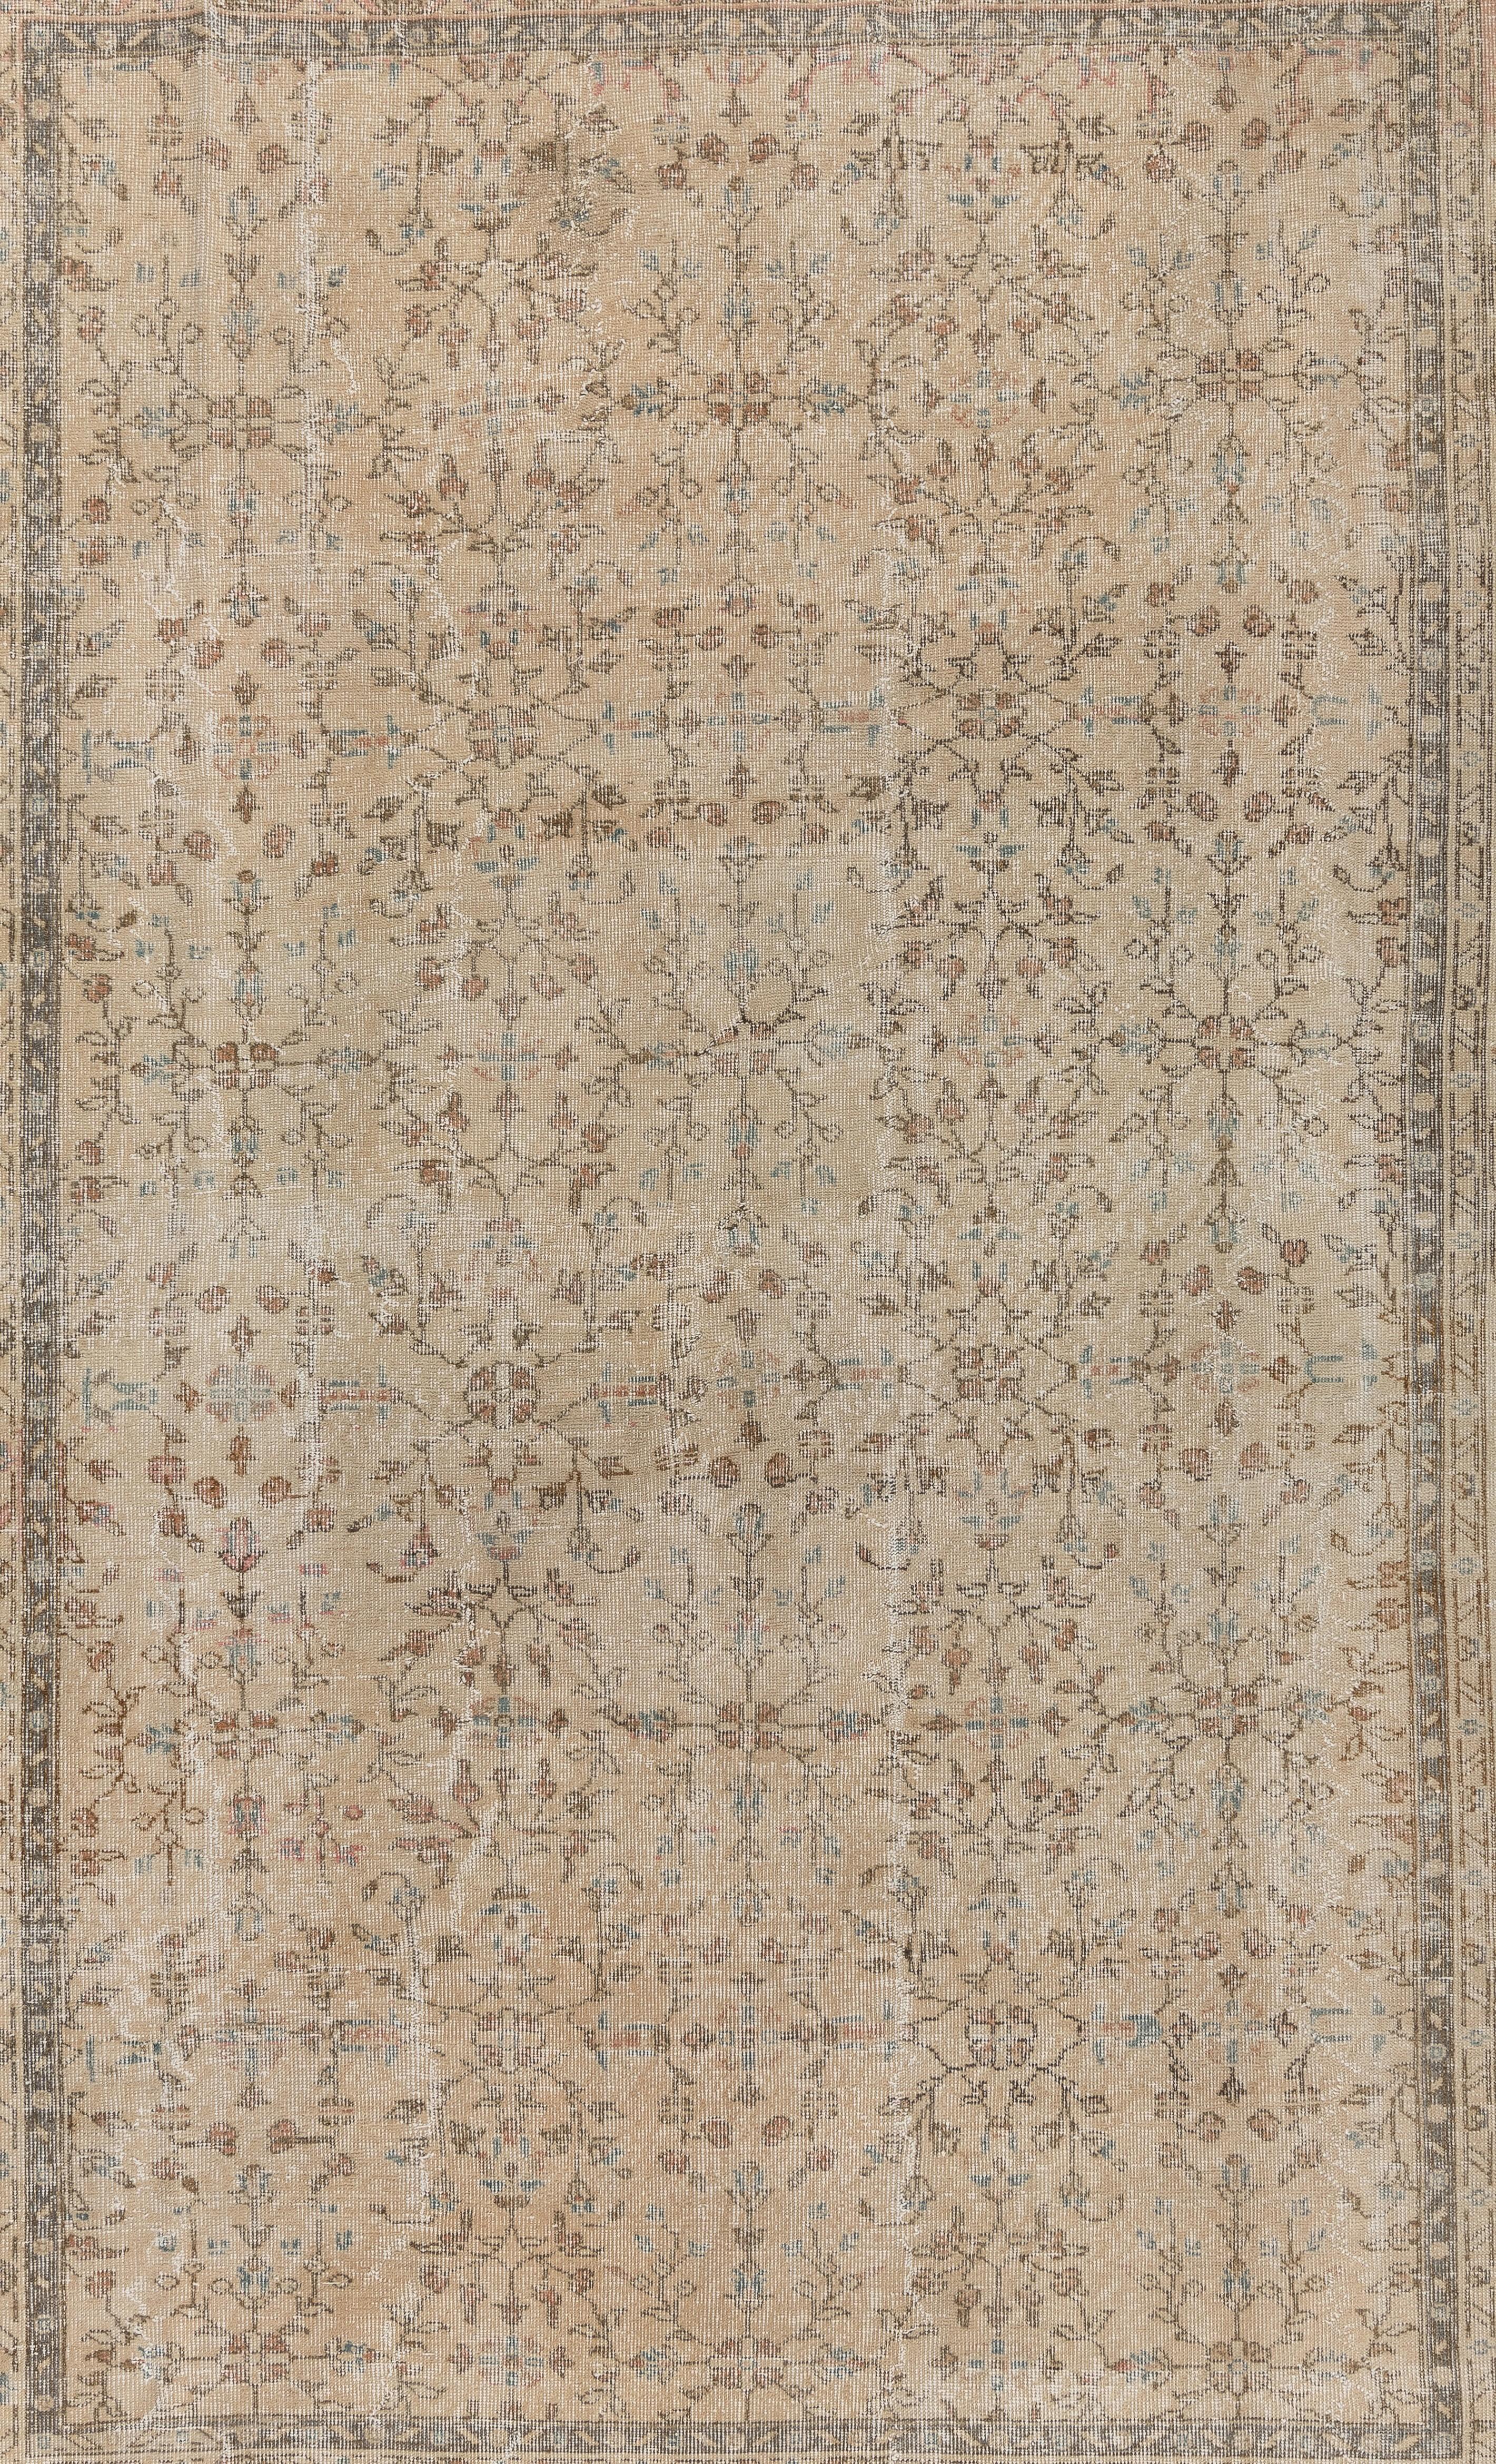 20th Century 7.4x10.4 Ft Handmade Vintage Floral Turkish Area Rug in Muted, Earthy Colors. 